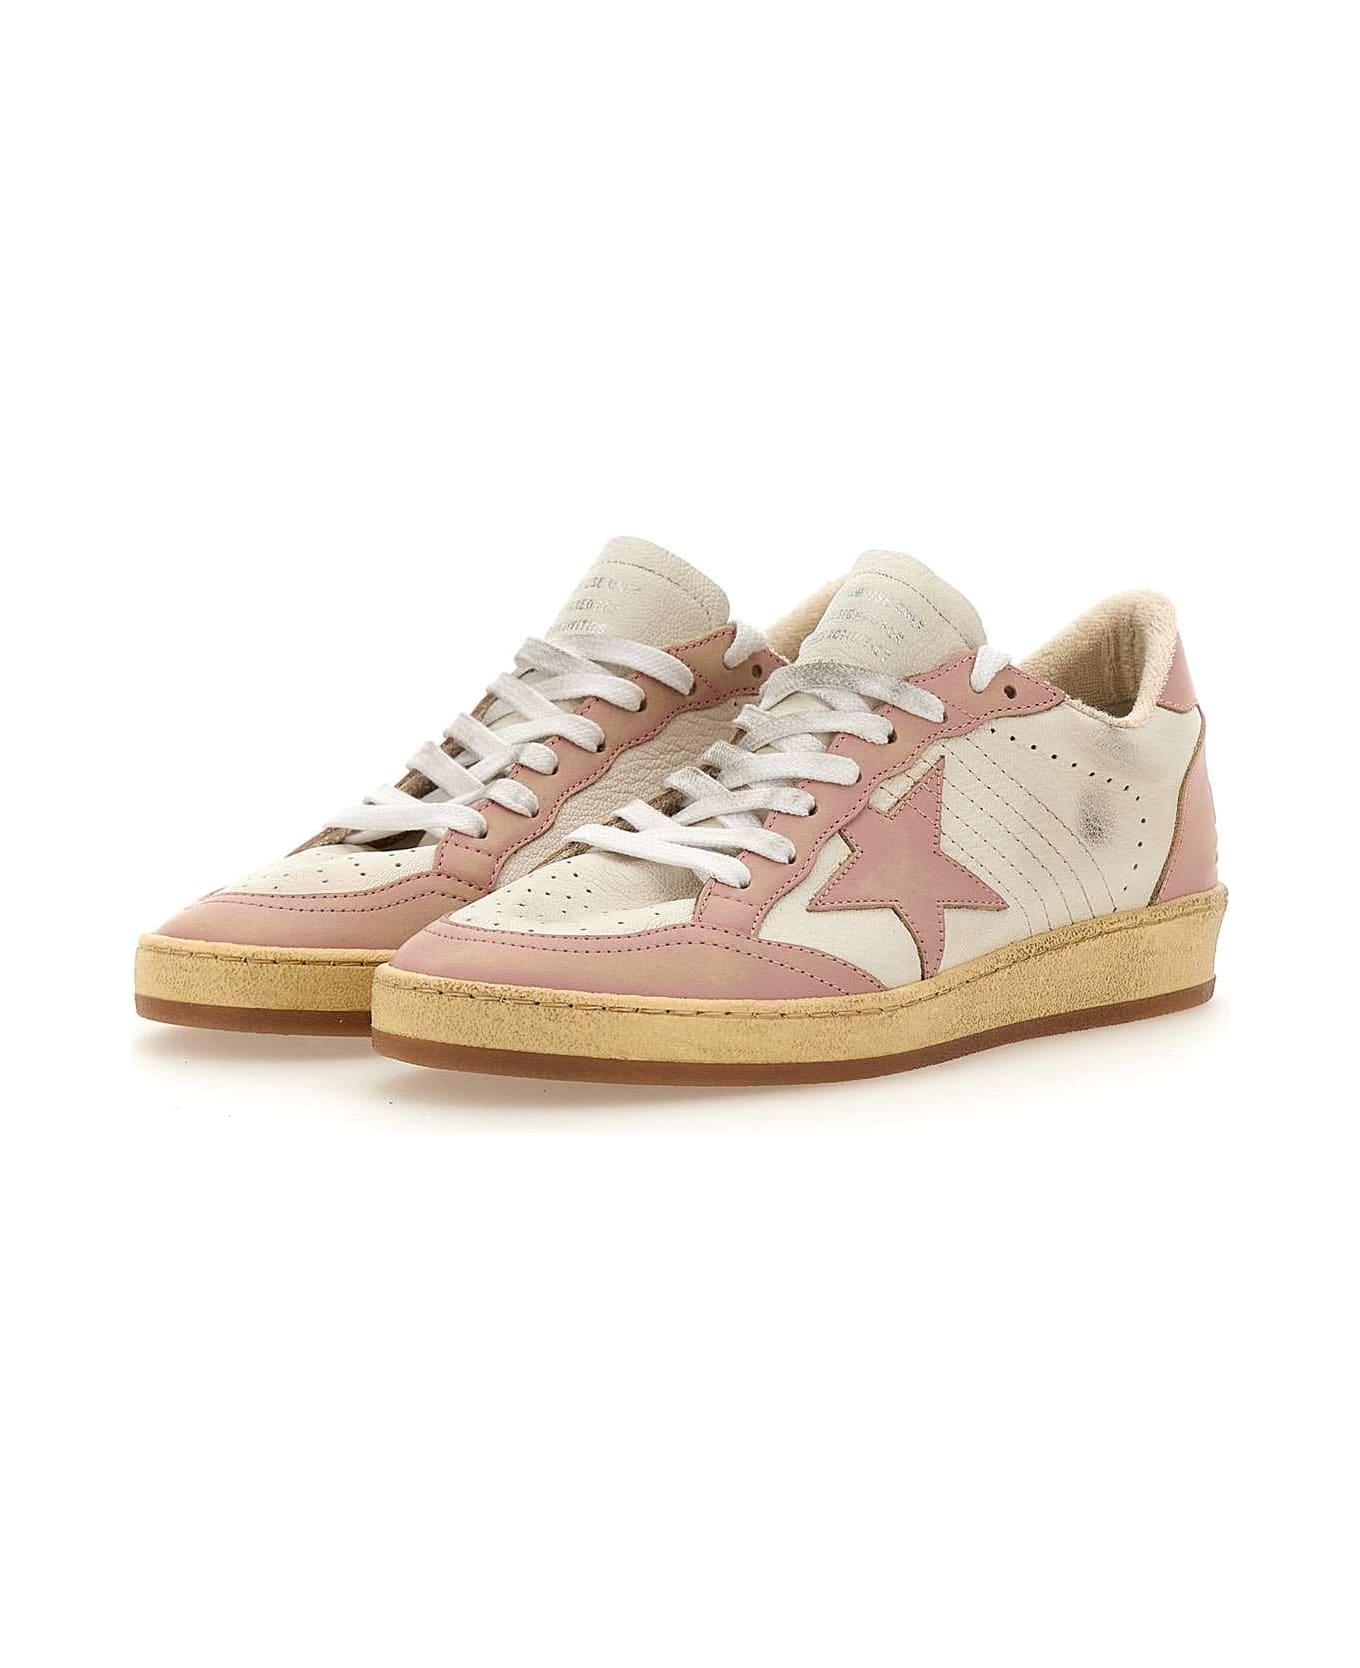 Golden Goose Ball Star Leather Sneakers - White/Pink スニーカー